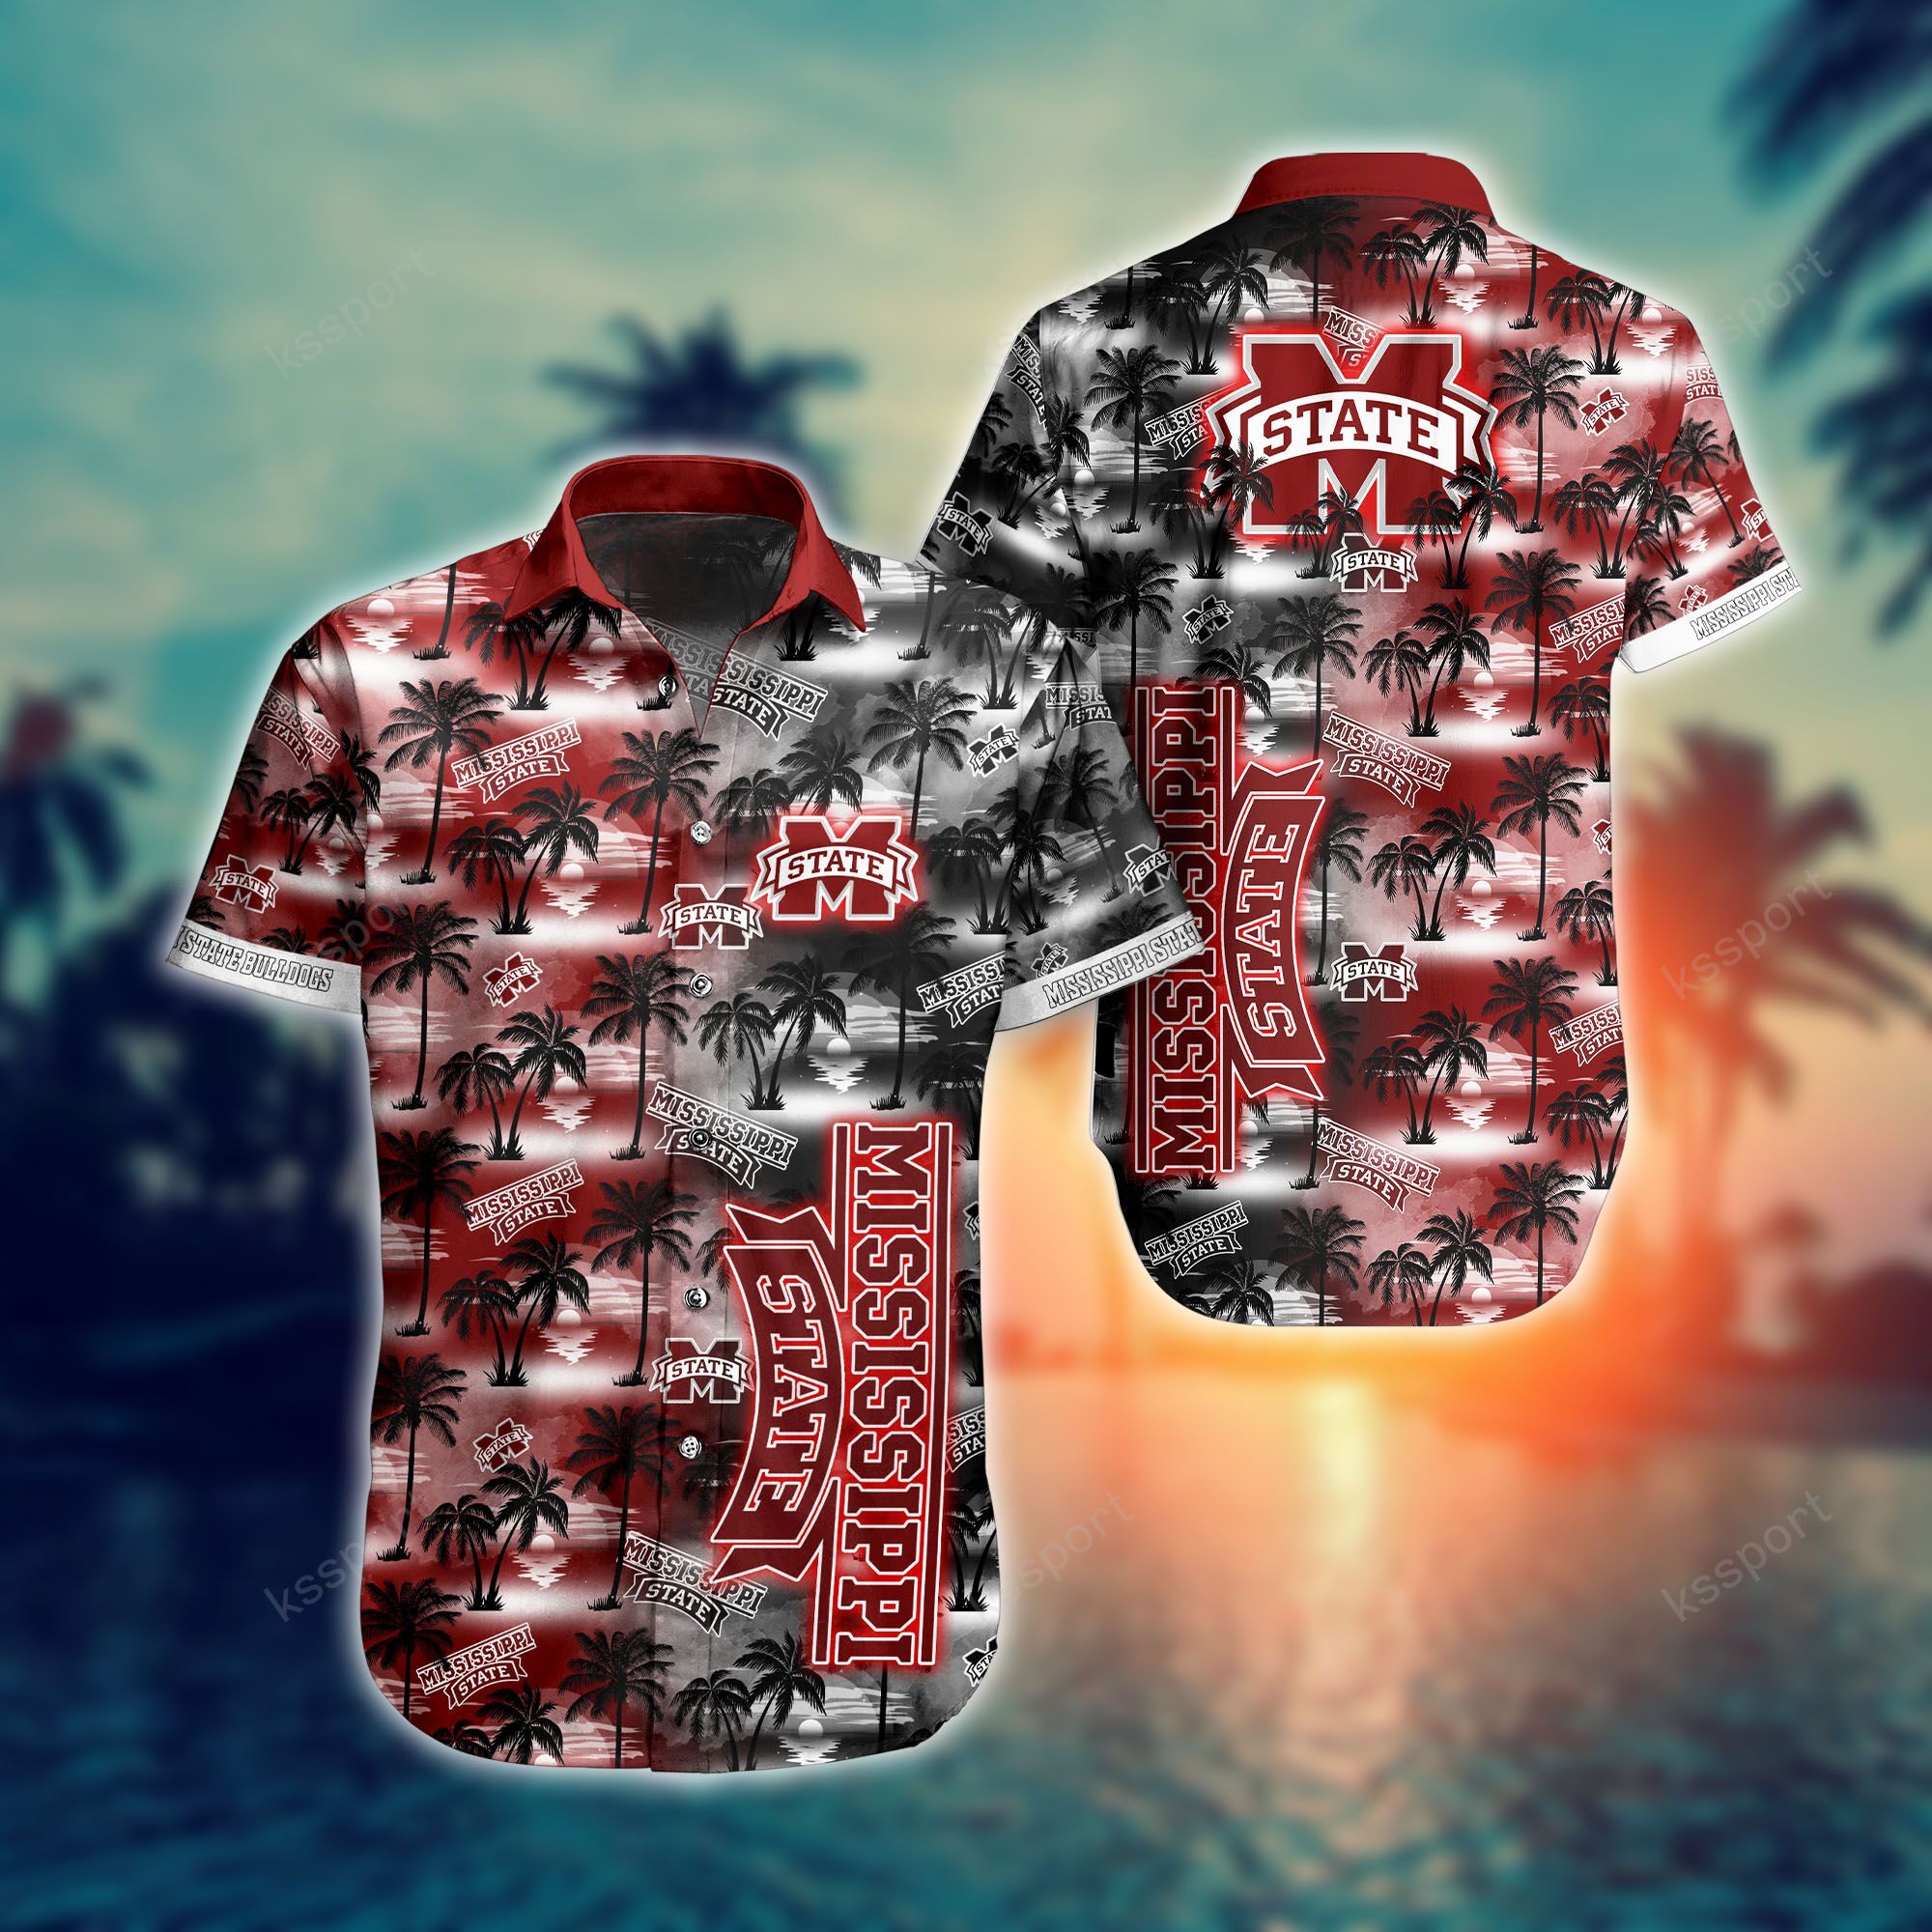 Treat yourself to a cool Hawaiian set today! 39